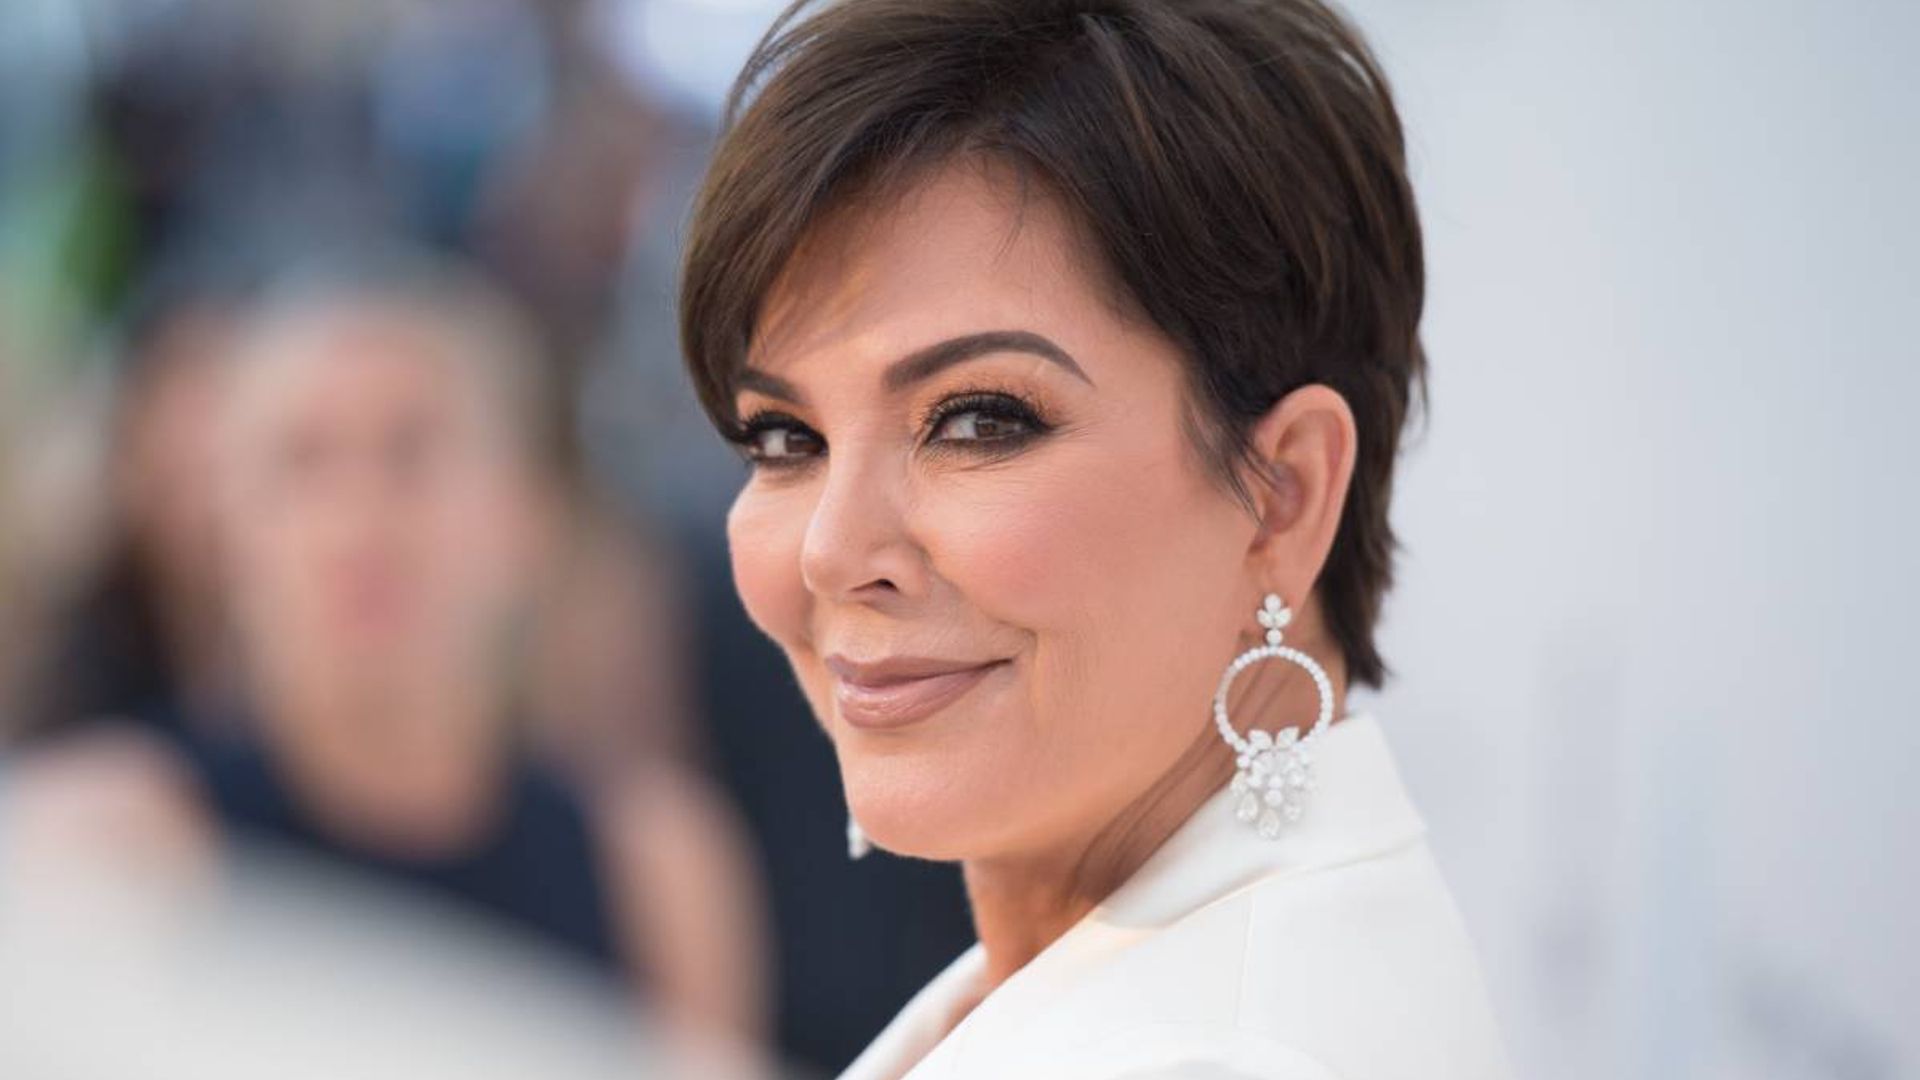 Kris Jenner looks unrecognisable with blonde hair in incredible photo